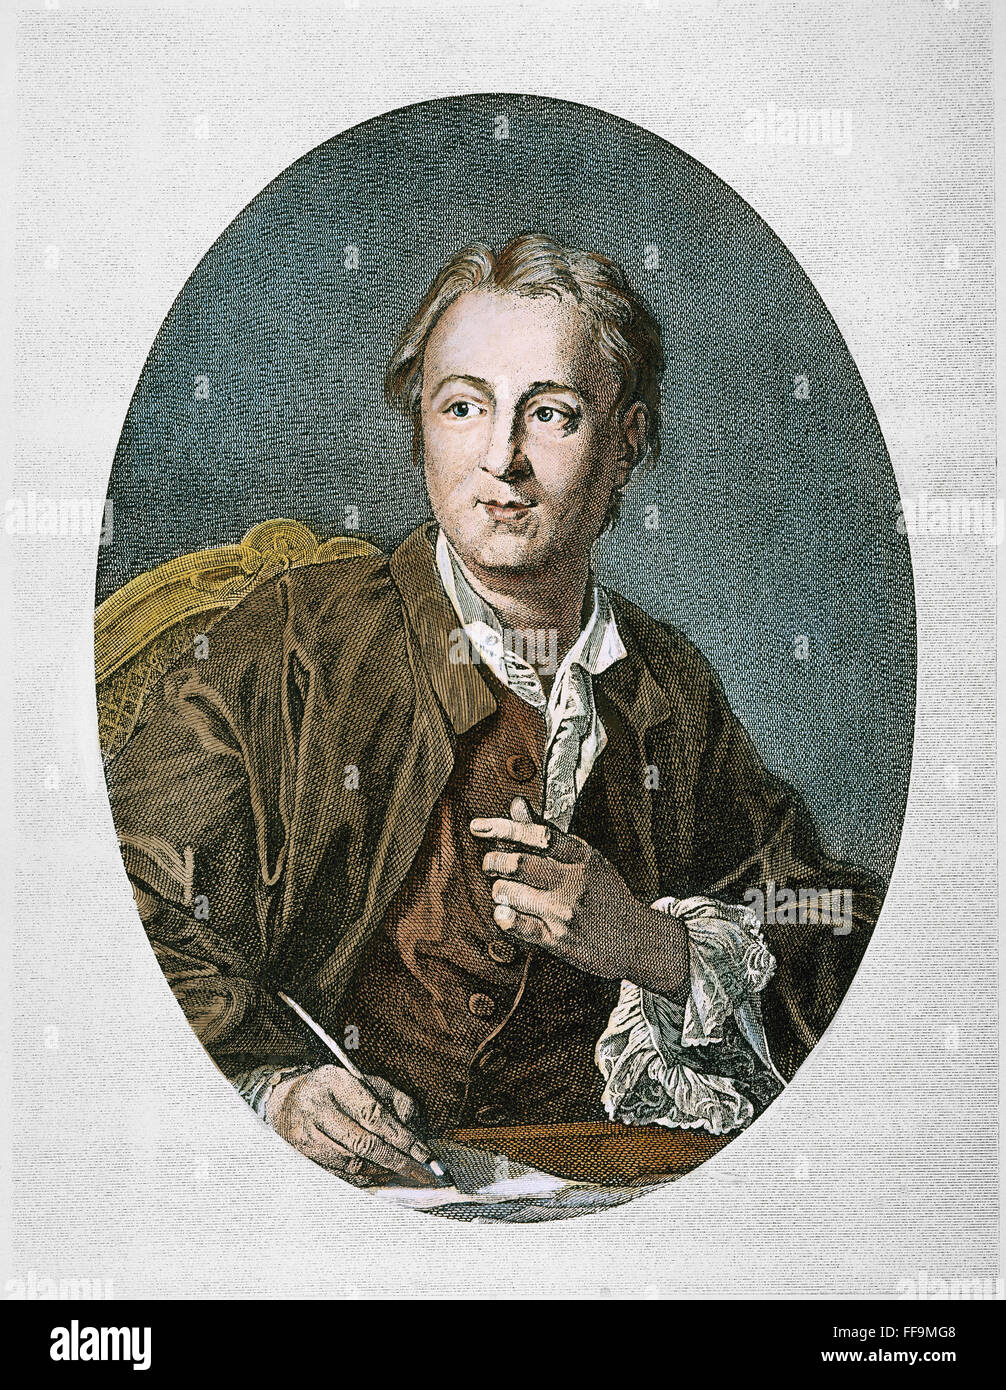 DENIS DIDEROT (1713-1784). /nFrench encyclopedist and philosopher. Line engraving, 19th century. Stock Photo